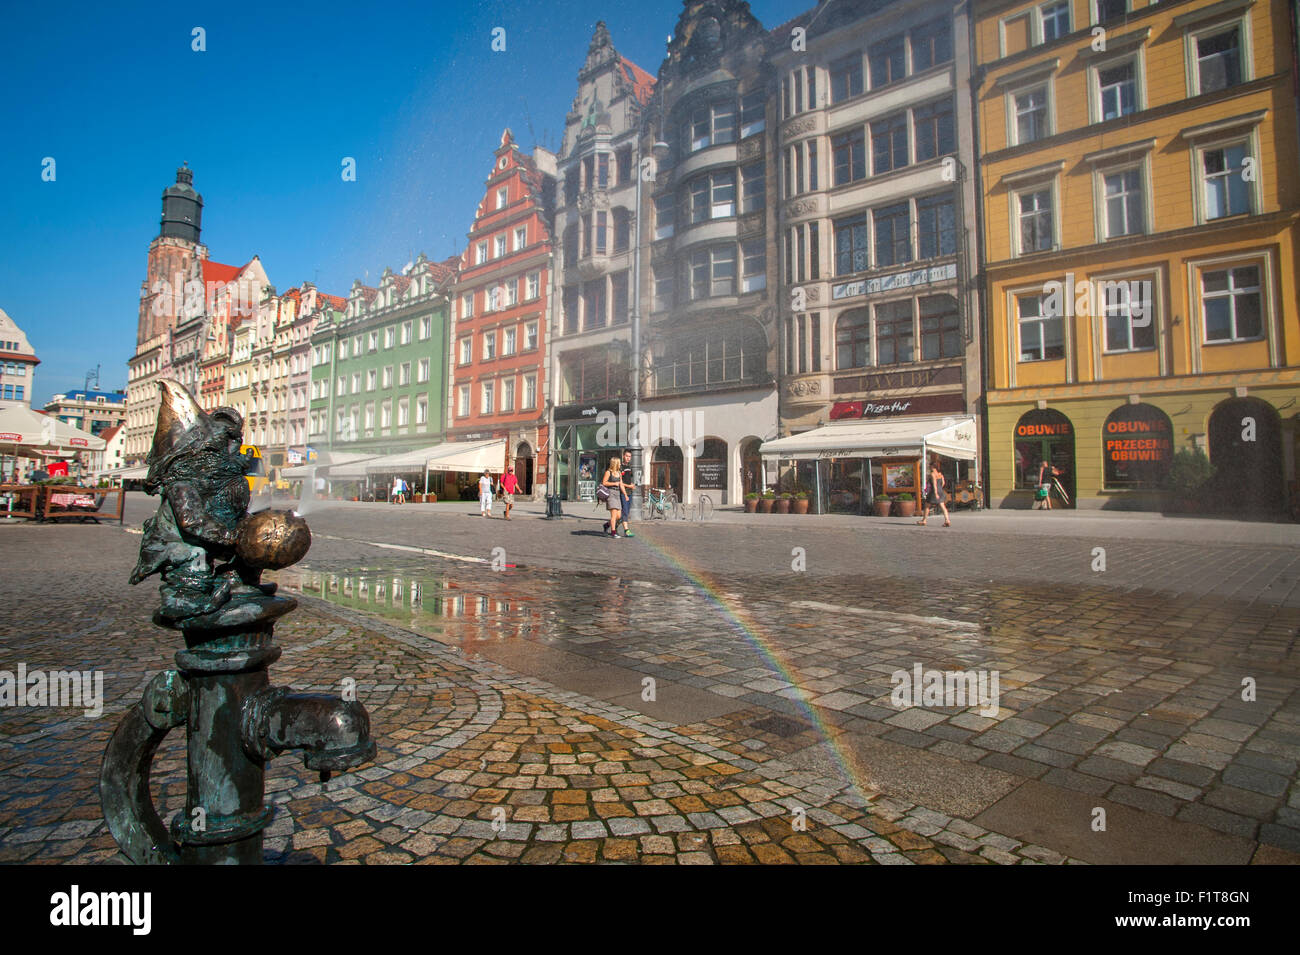 The medieval market square of the Rynek in Wroclaw, Poland Stock Photo -  Alamy